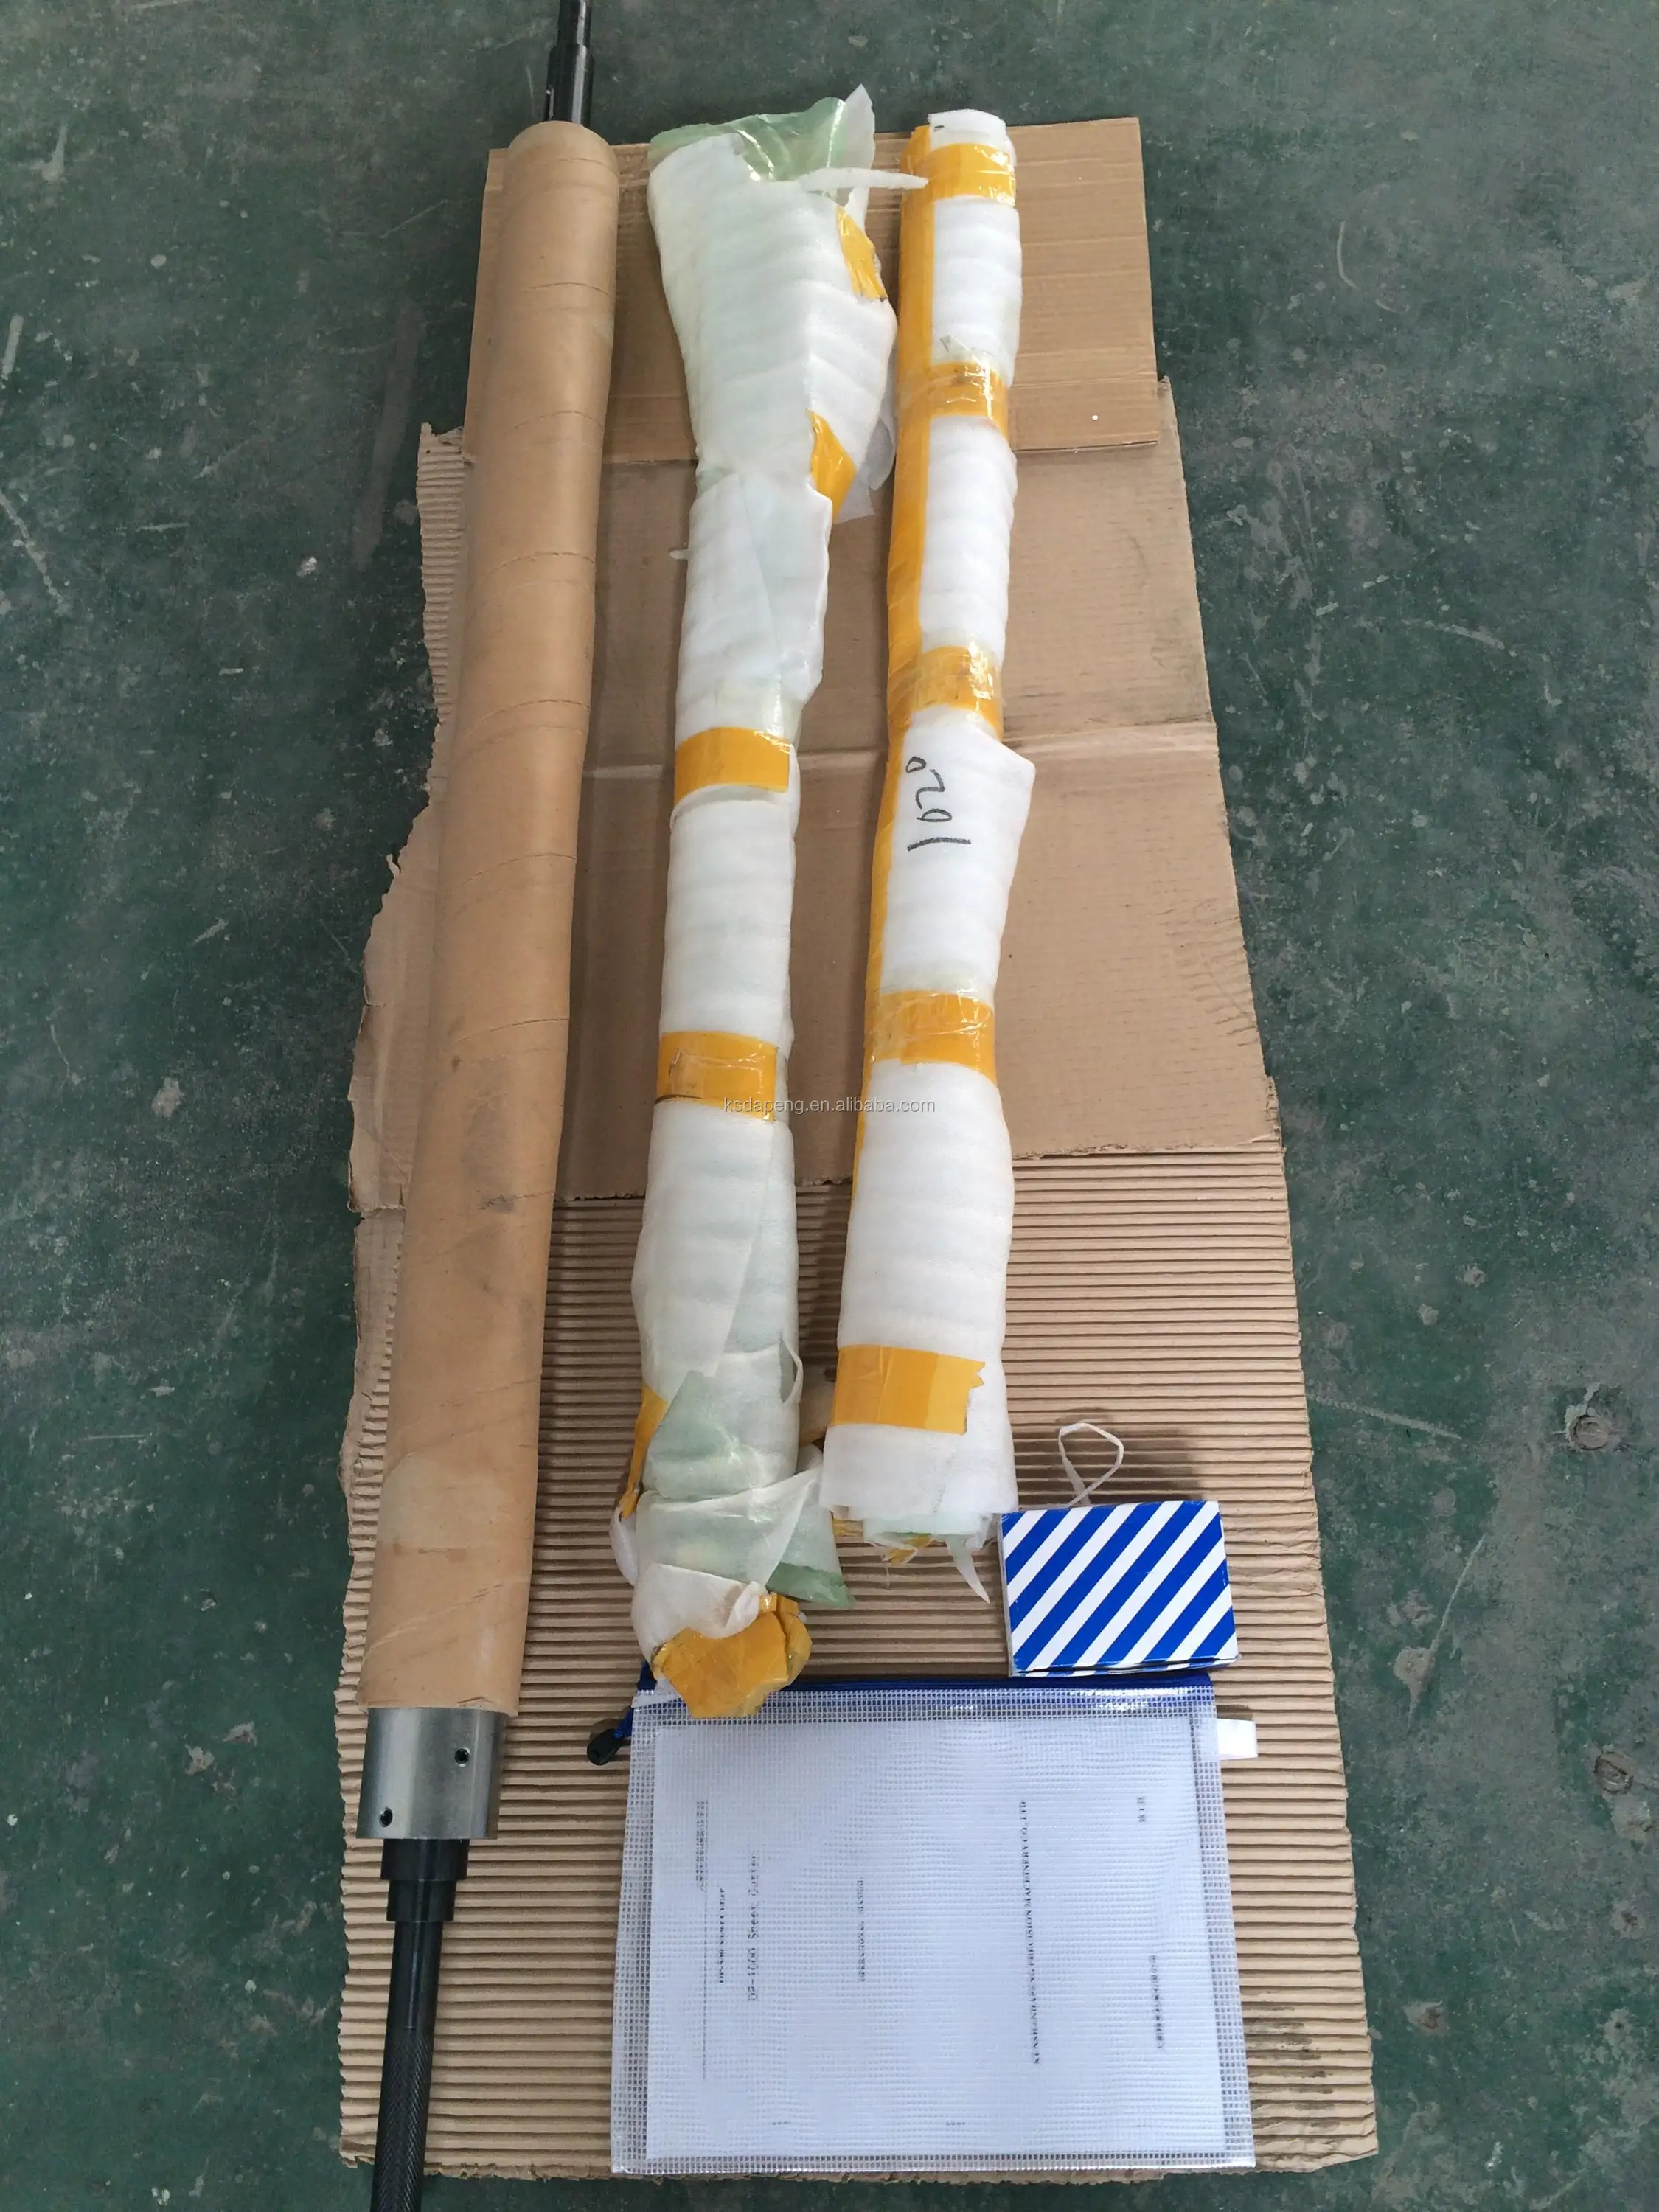 color printed paper roll to sheet cutting machine